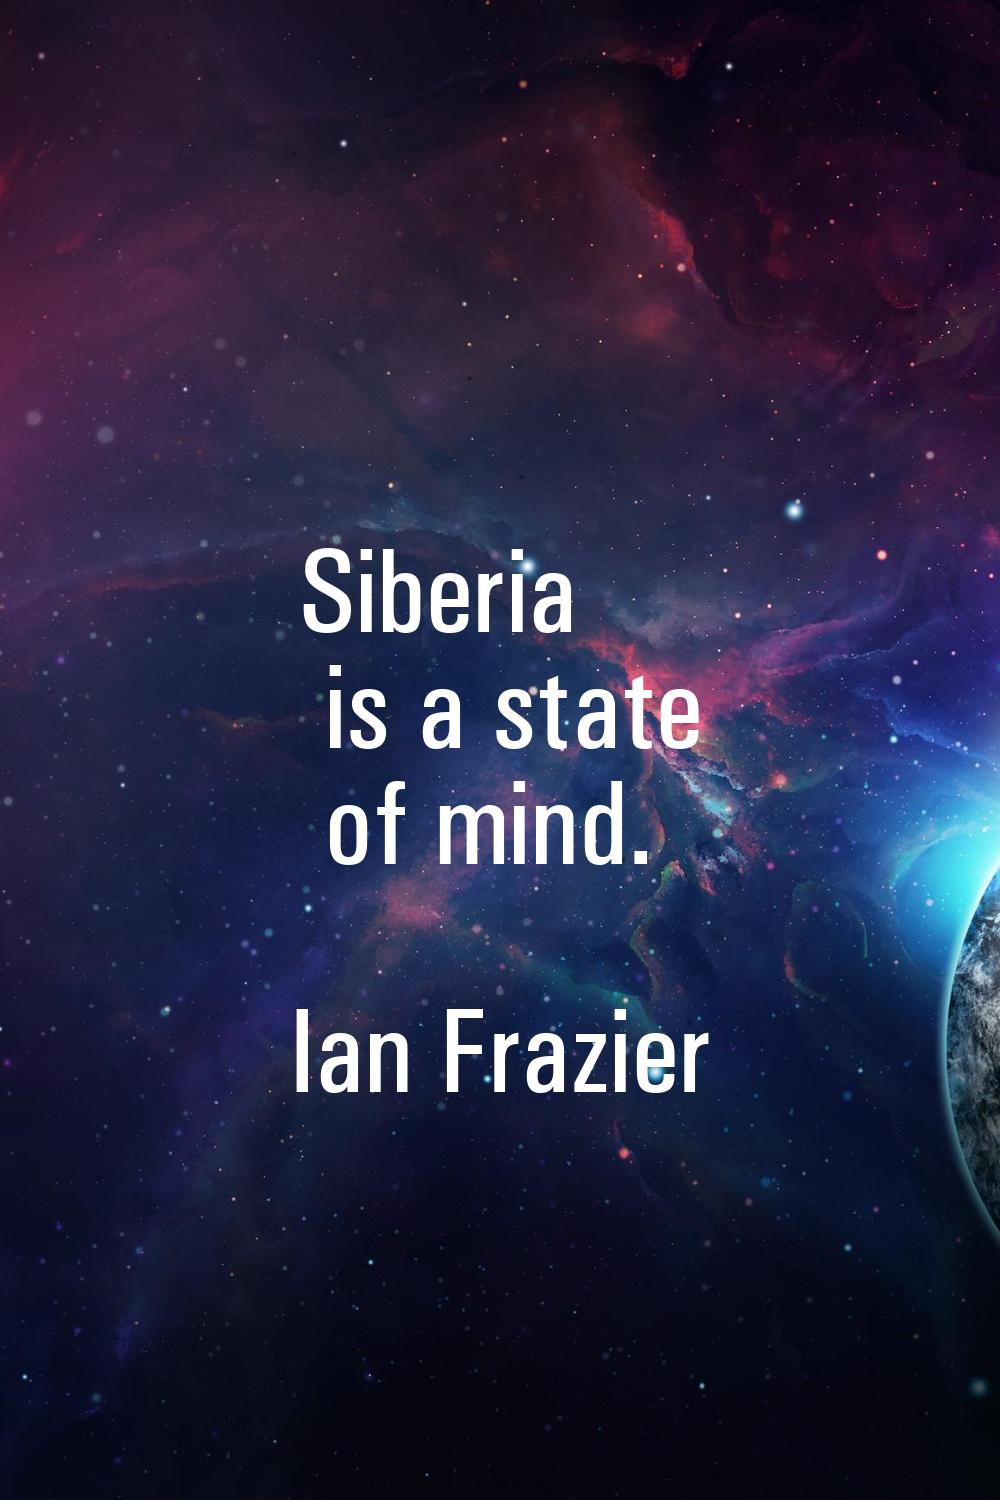 Siberia is a state of mind.